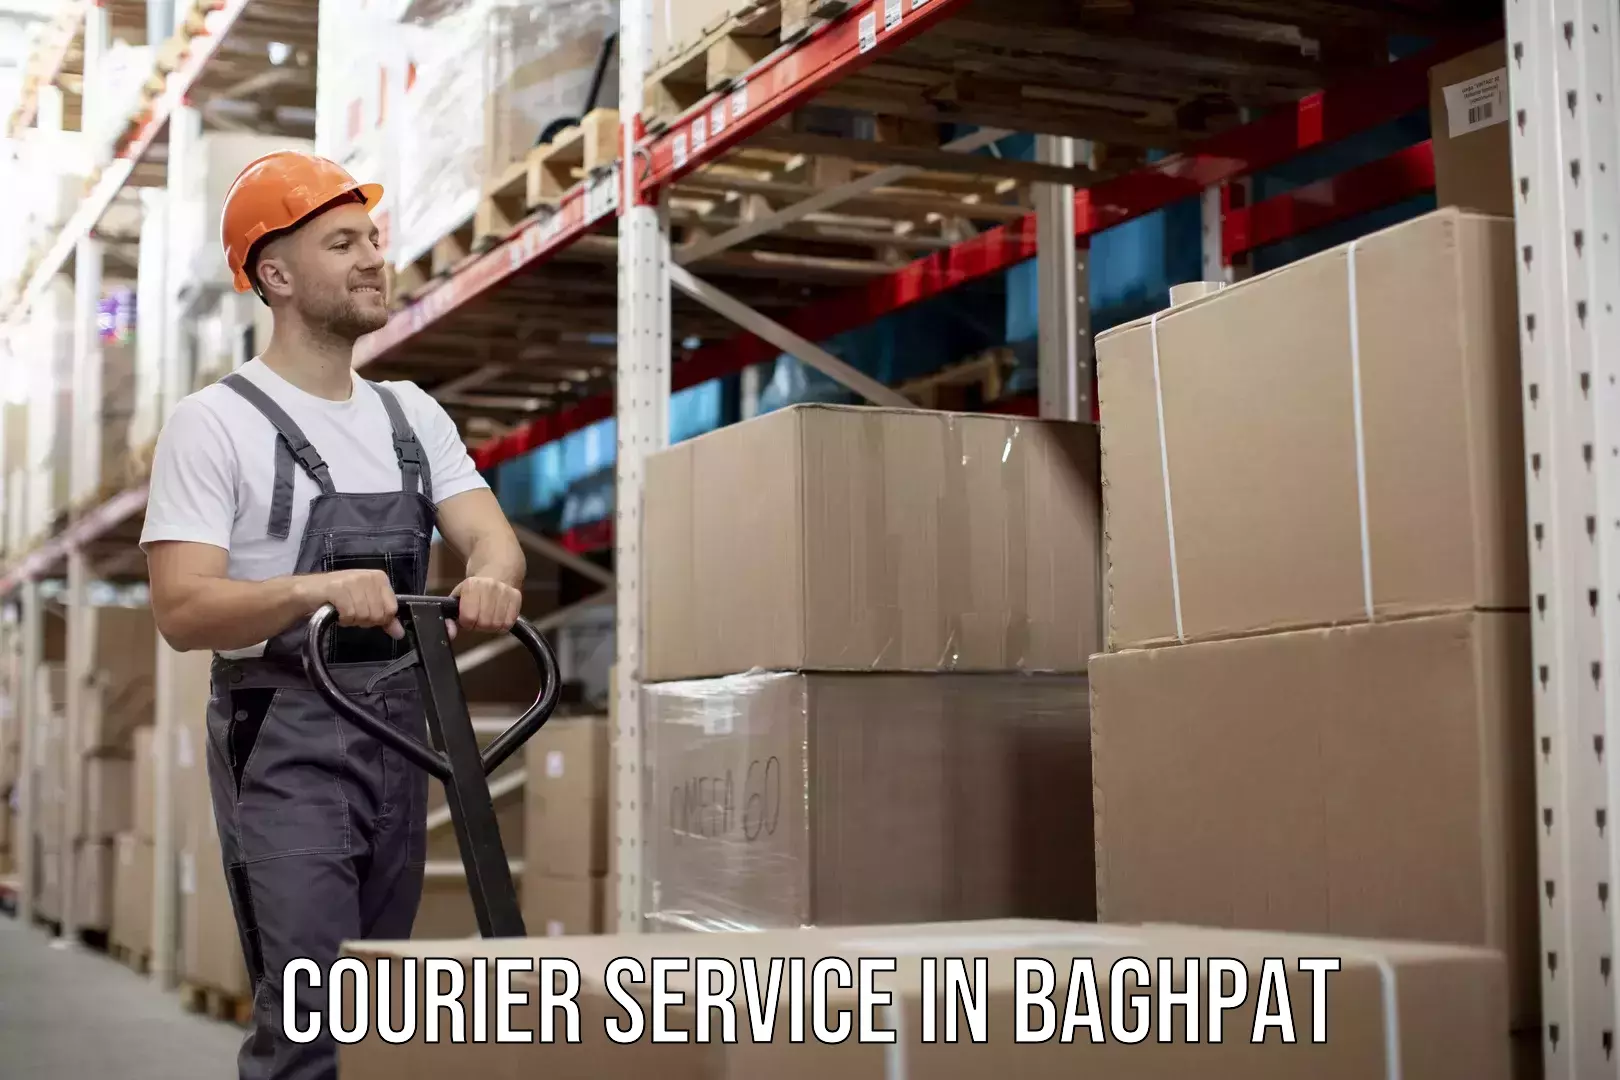 Dynamic courier operations in Baghpat